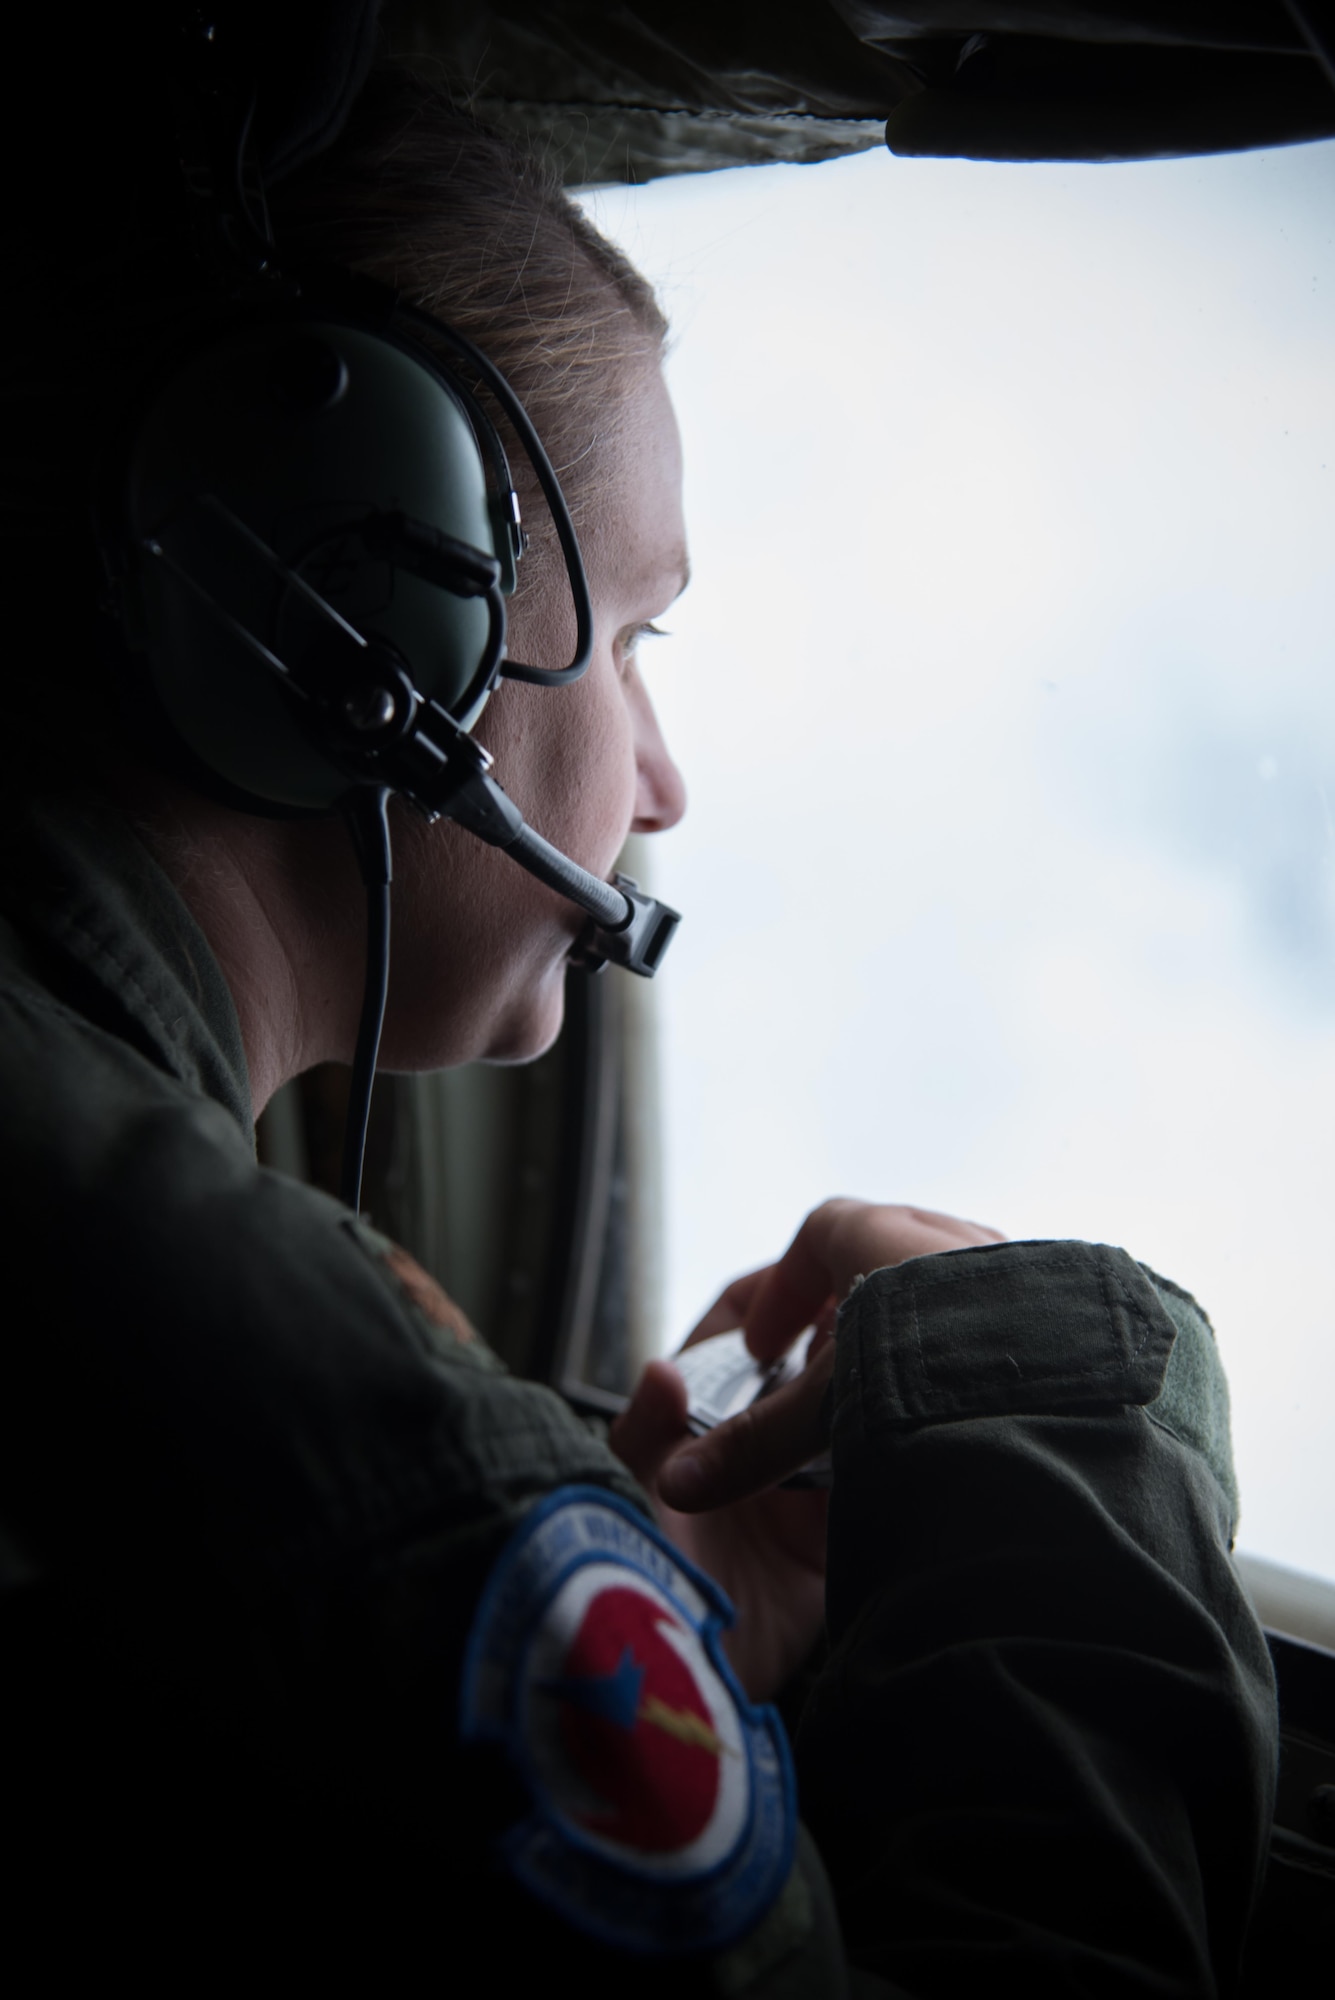 Maj. Kimberly Spusta, 53rd Weather Reconnaissance Squadron aerial reconnaissance weather officer, collects weather data for the National Hurricane Center during a flight into Hurricane Harvey Aug. 24, 2017 out of Keesler Air Force Base, Mississippi. (U.S. Air Force photo/Staff Sgt. Heather Heiney)